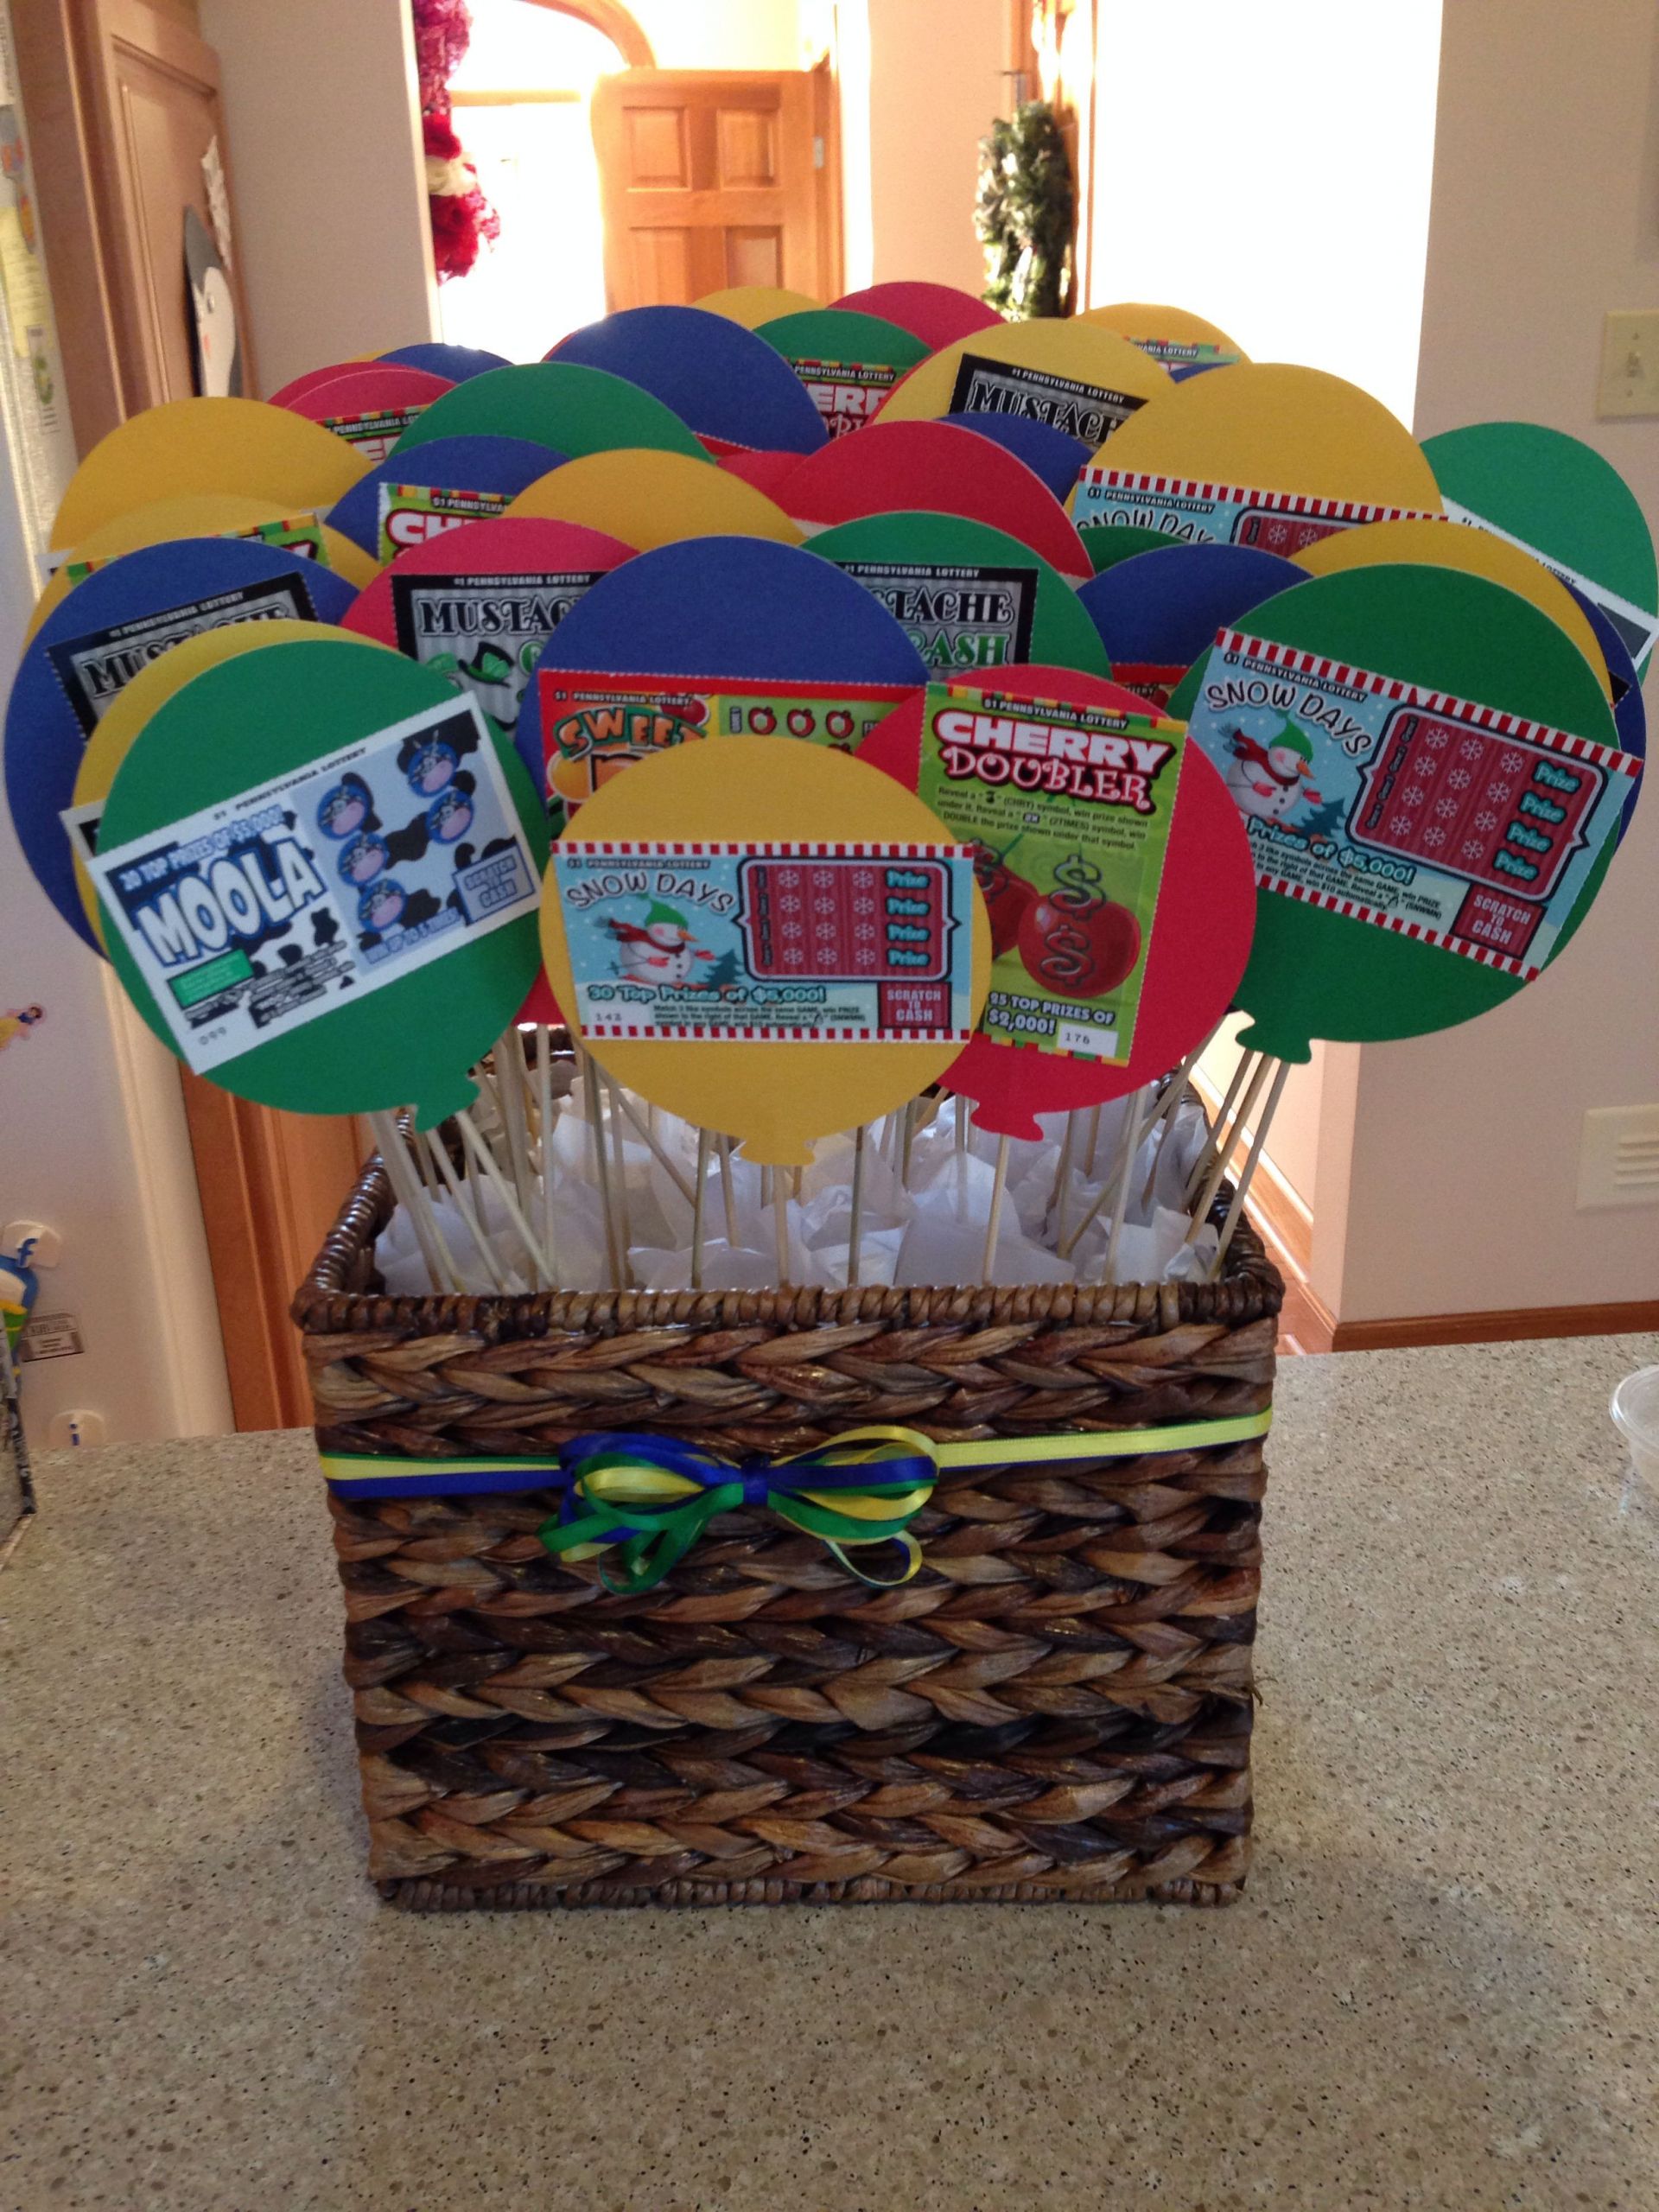 60Th Birthday Gift Basket Ideas
 "My dad s 60th birthday present 60 instant lottery